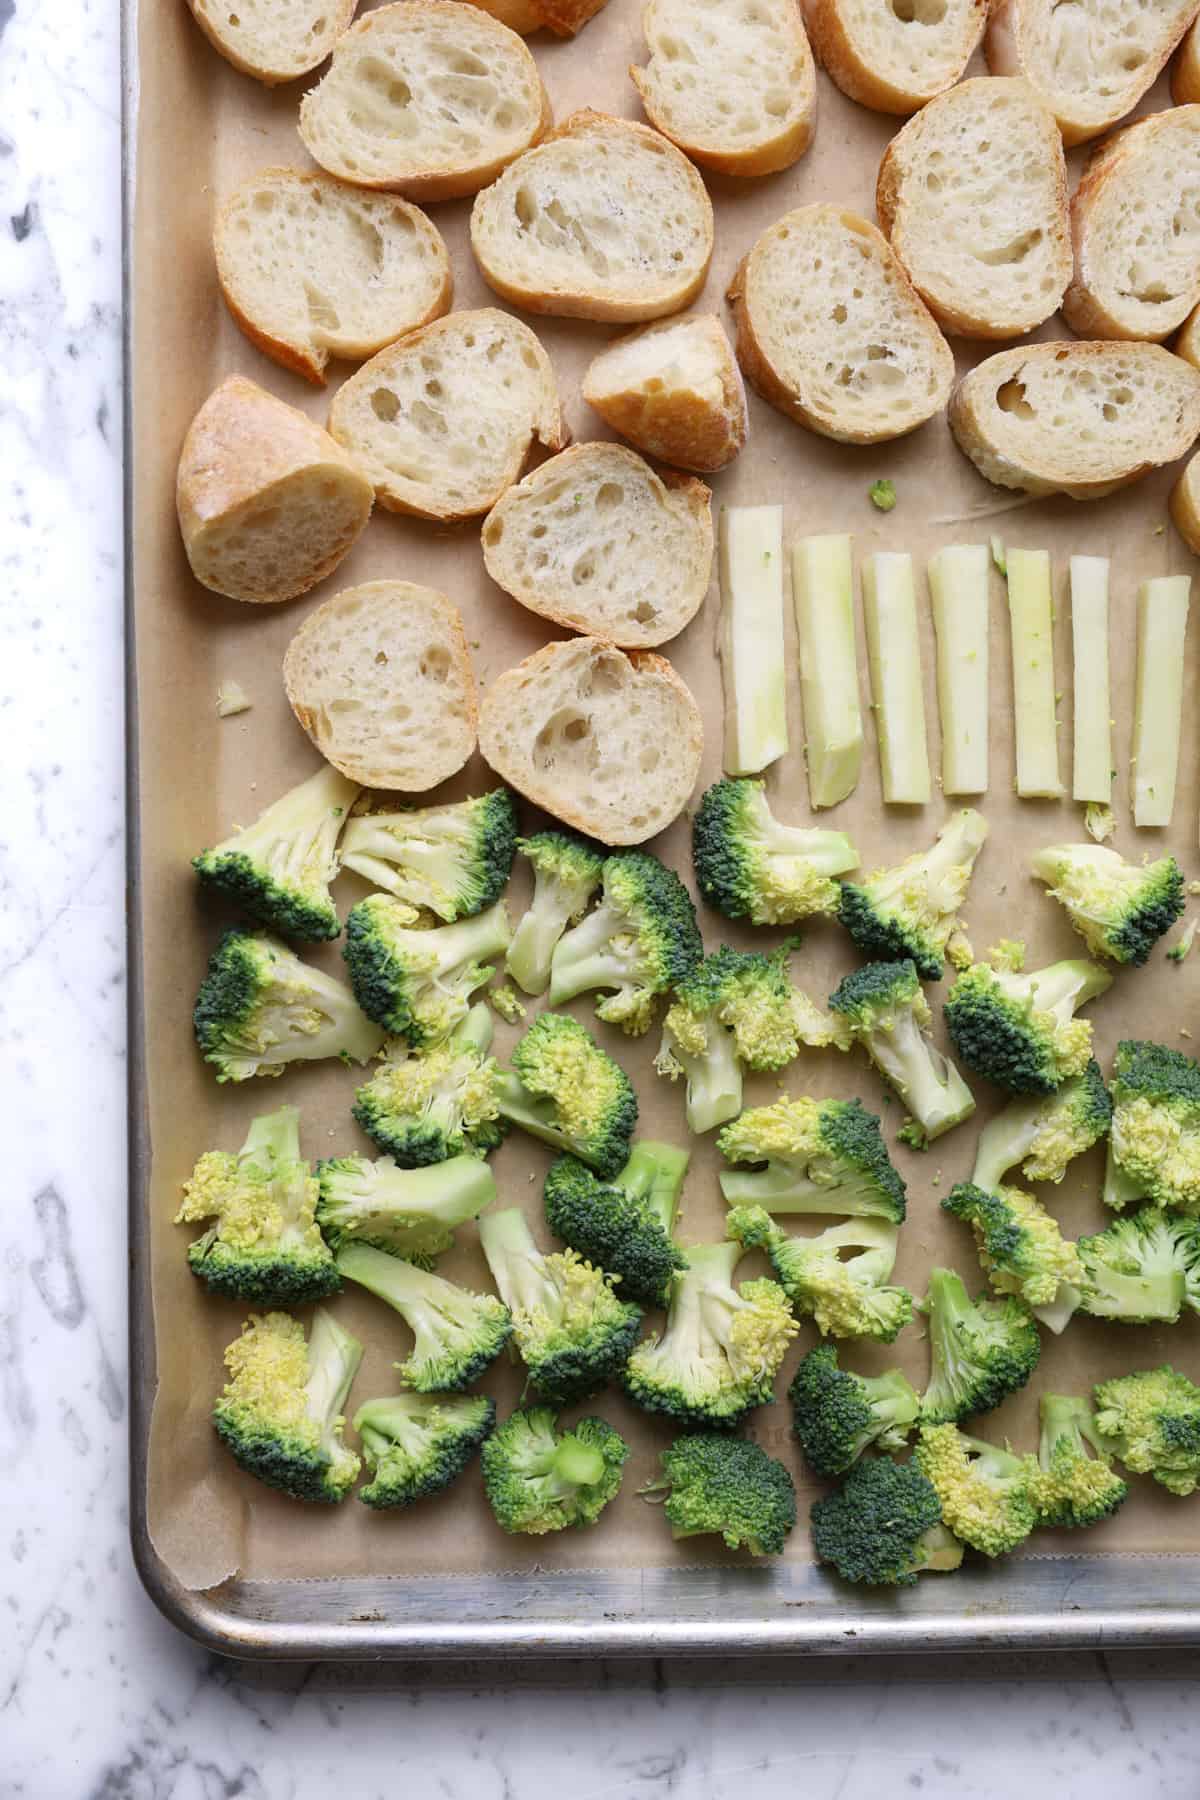 Broccoli and sourdough on a lined baking sheet.